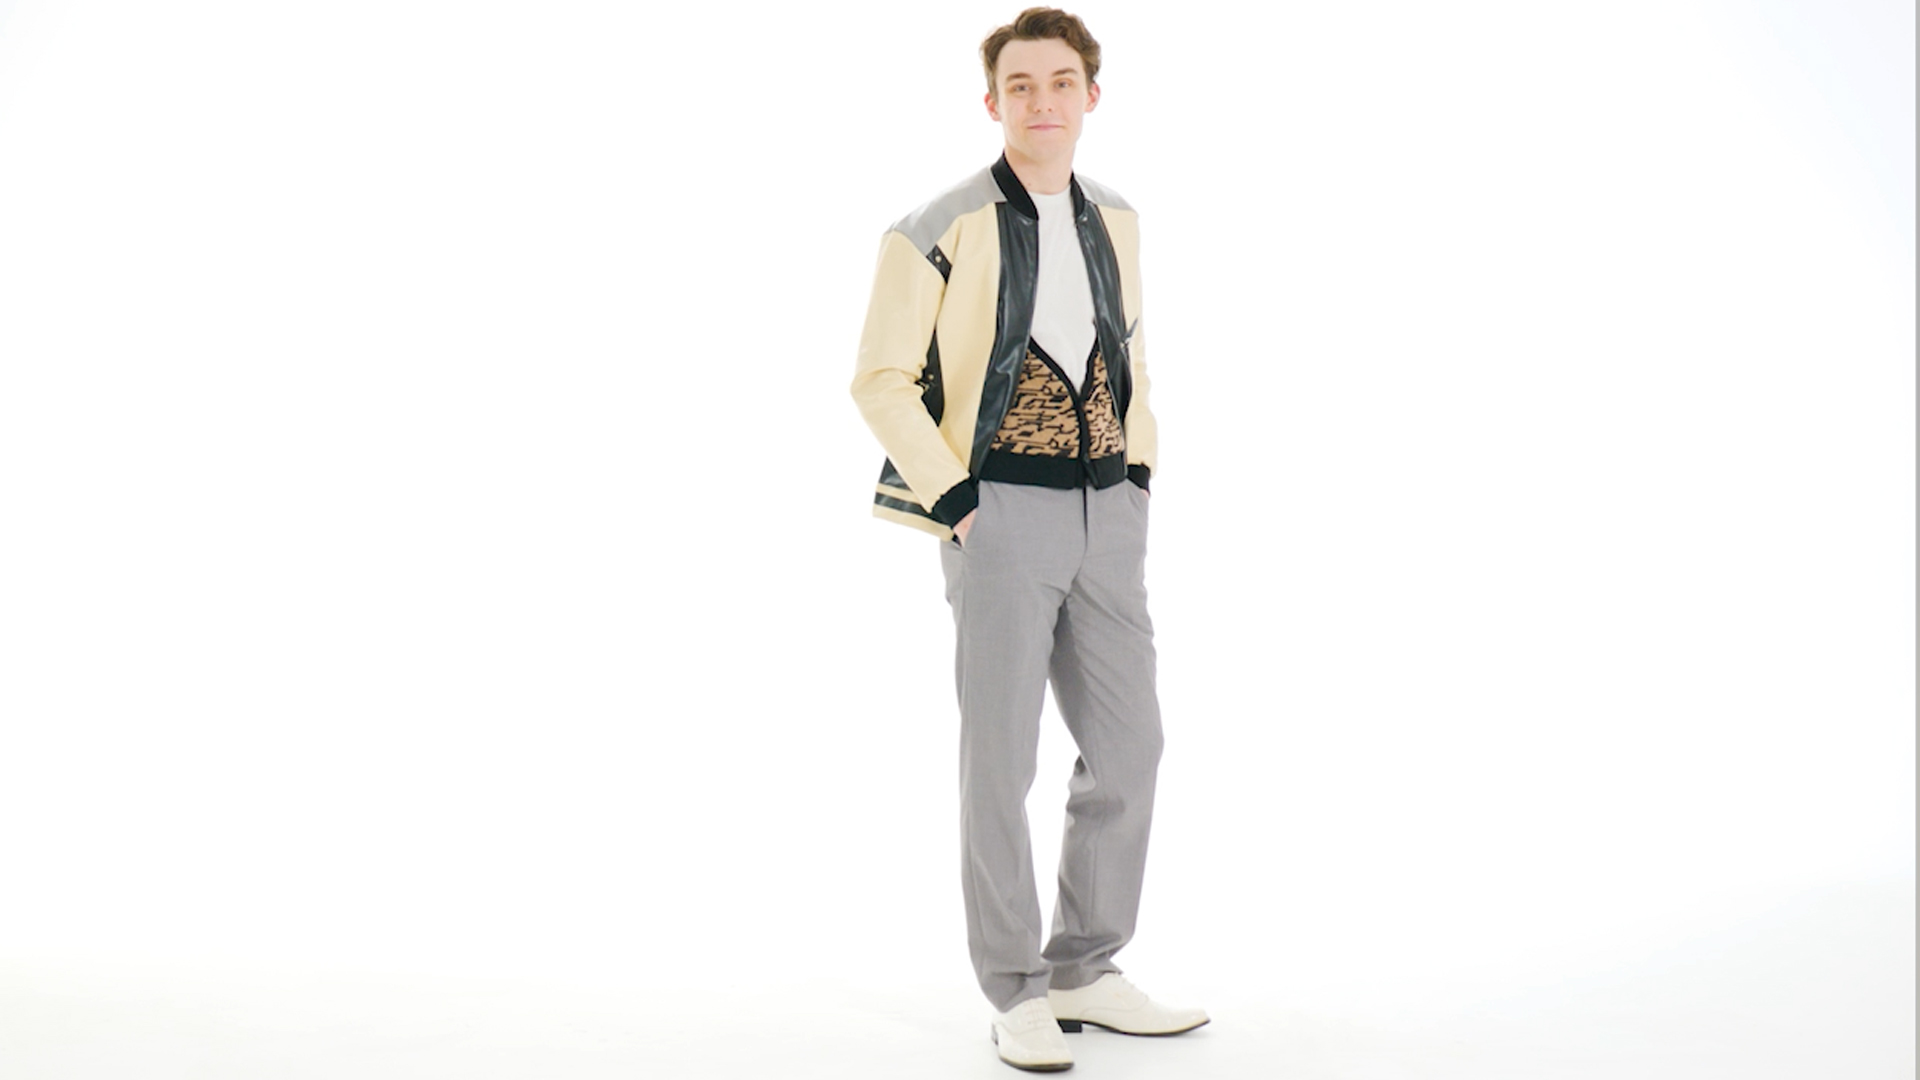 When you go in this Ferris Bueller Costume, you might just want to take a day off, take your best friends father's car, pretend you're the sausage king of Chicago, and otherwise have an amazing day.